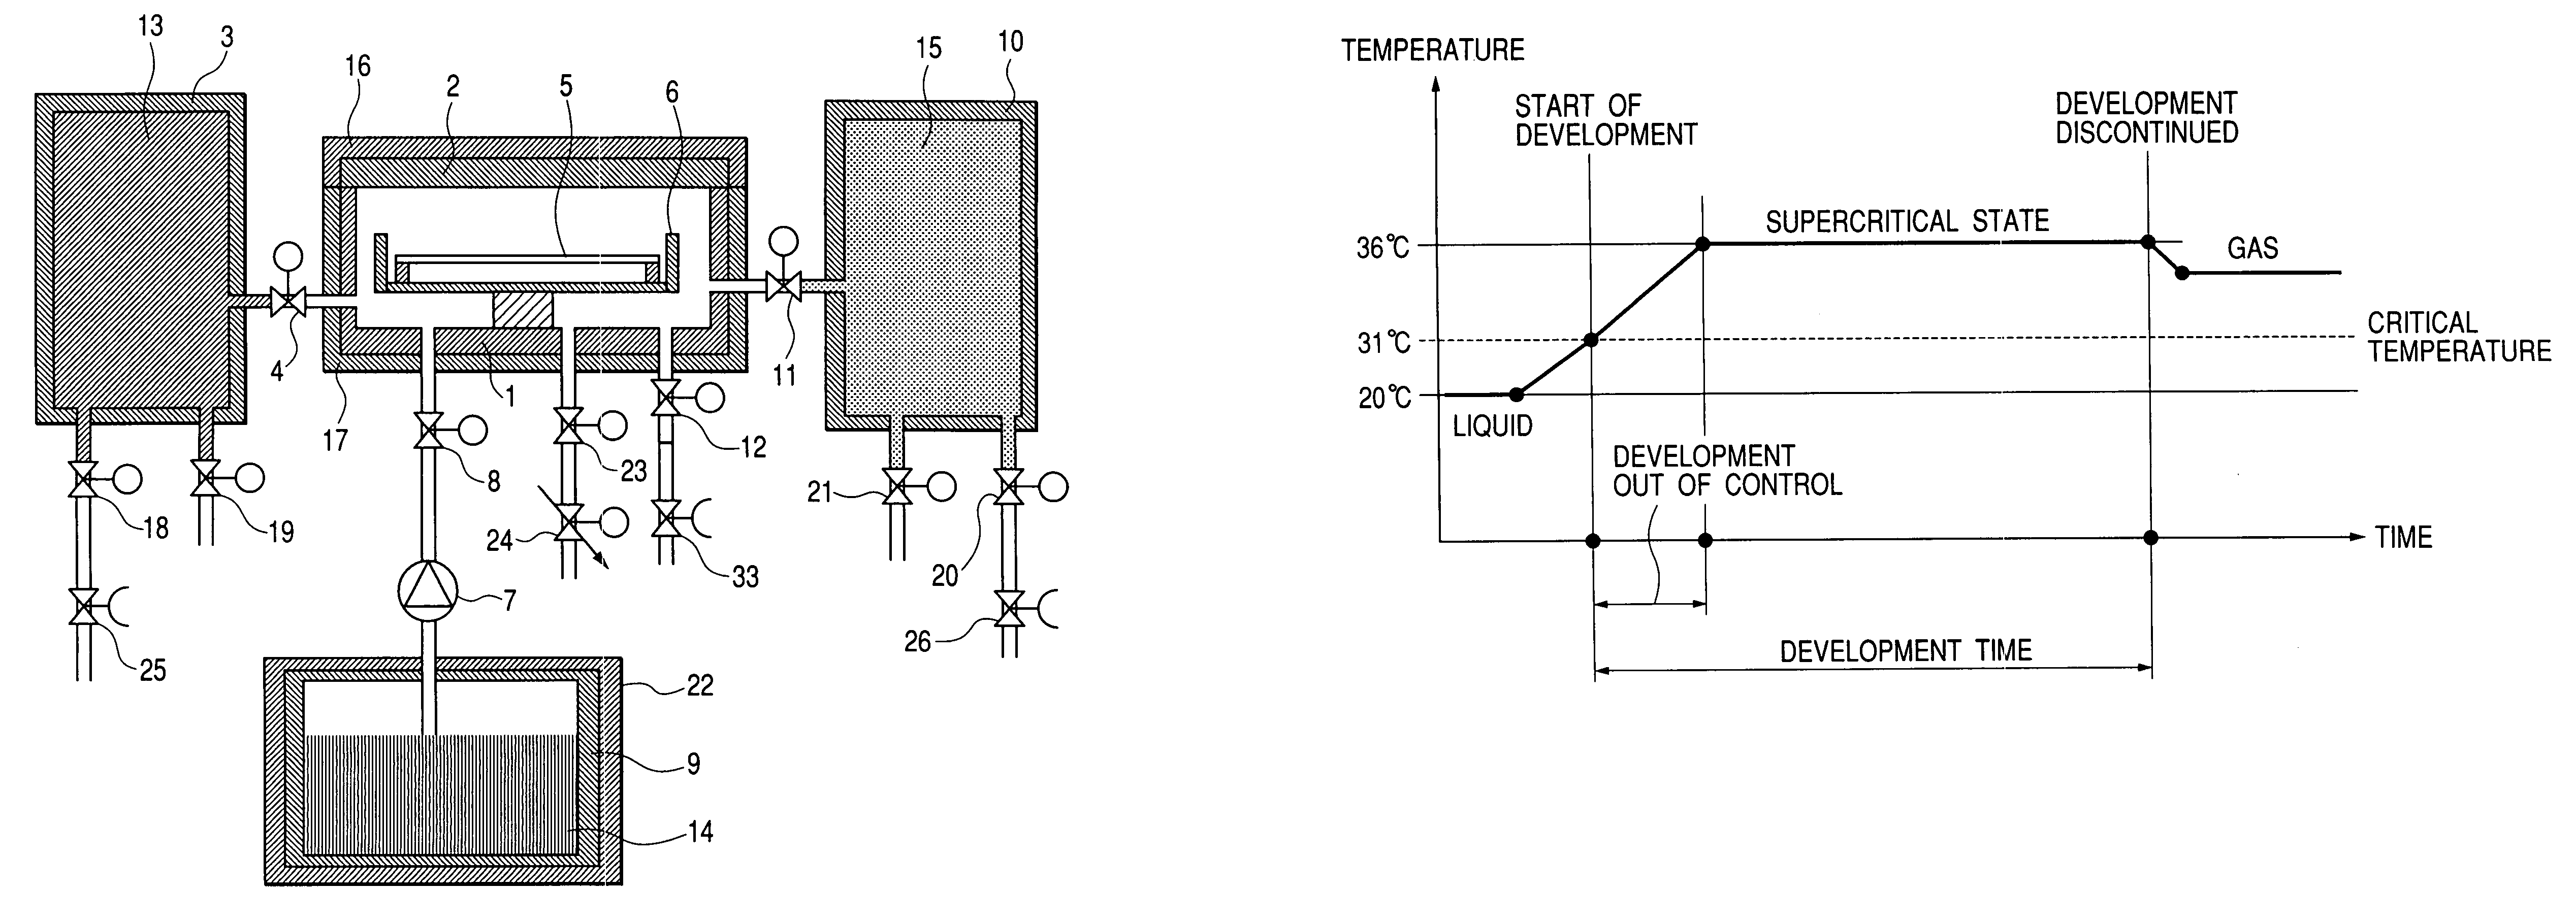 Method of developing a resist film and a resist development processor